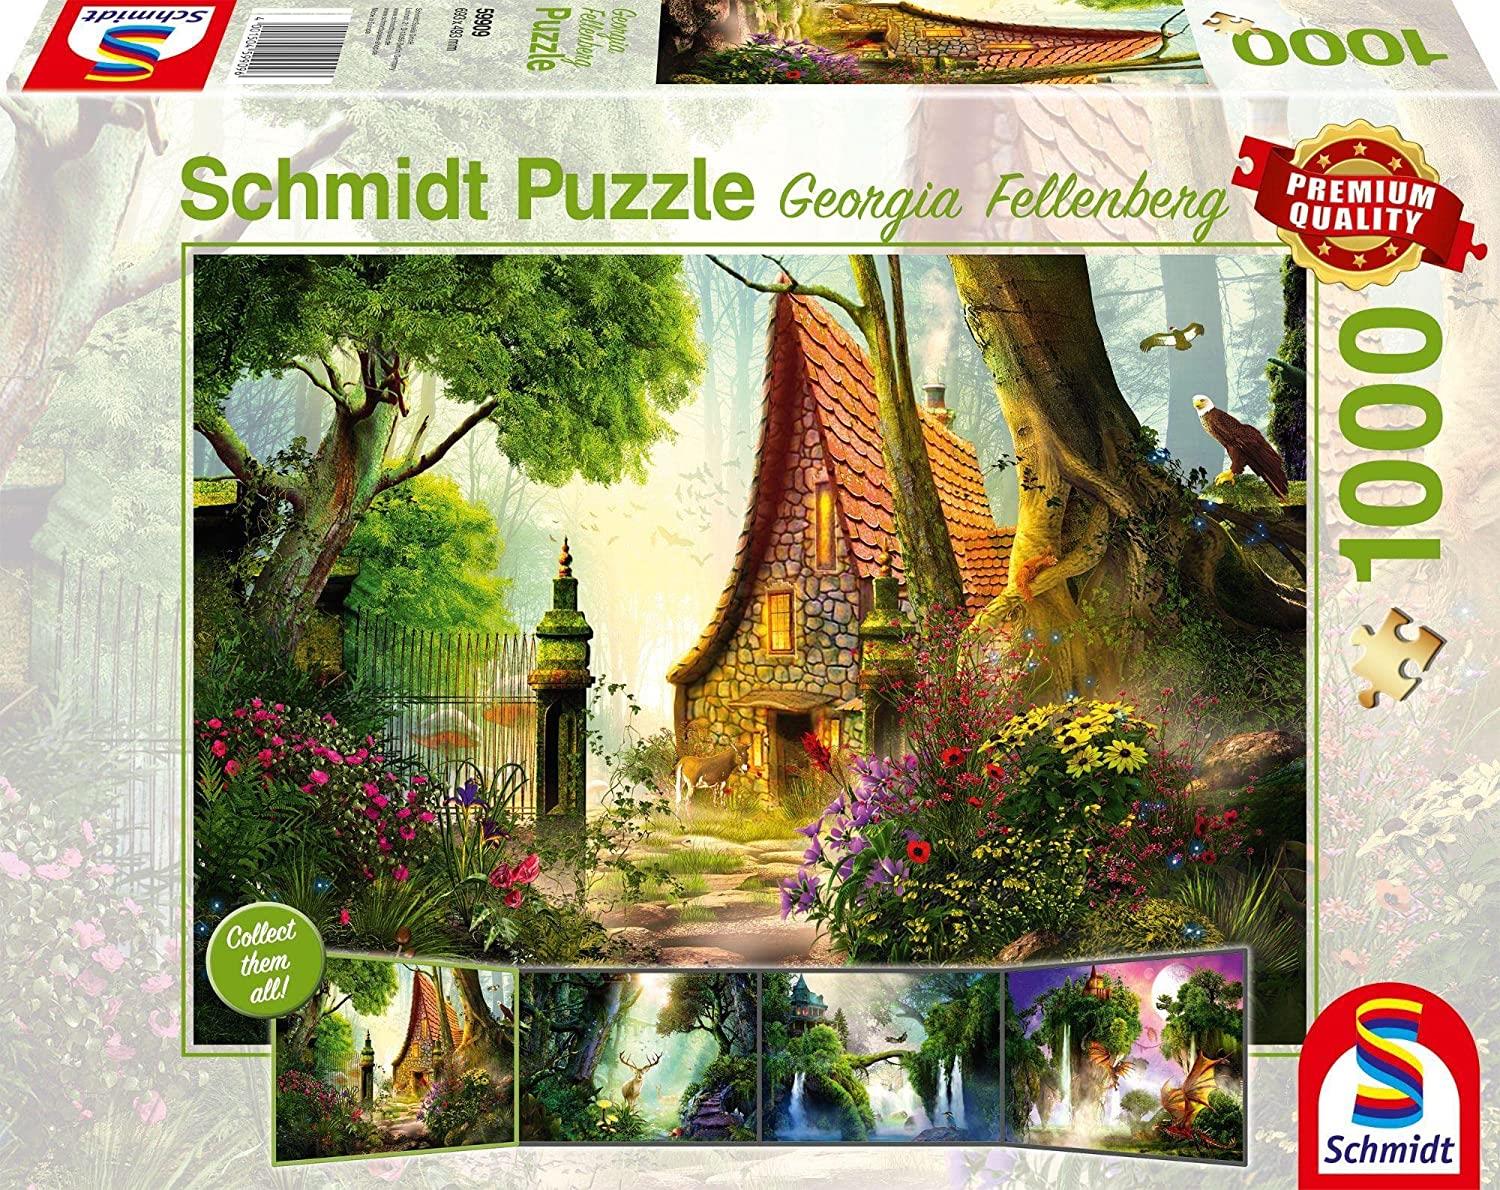 Schmidt Georgia Fellenberg: House in the Glade Jigsaw Puzzle (1000 Pieces)